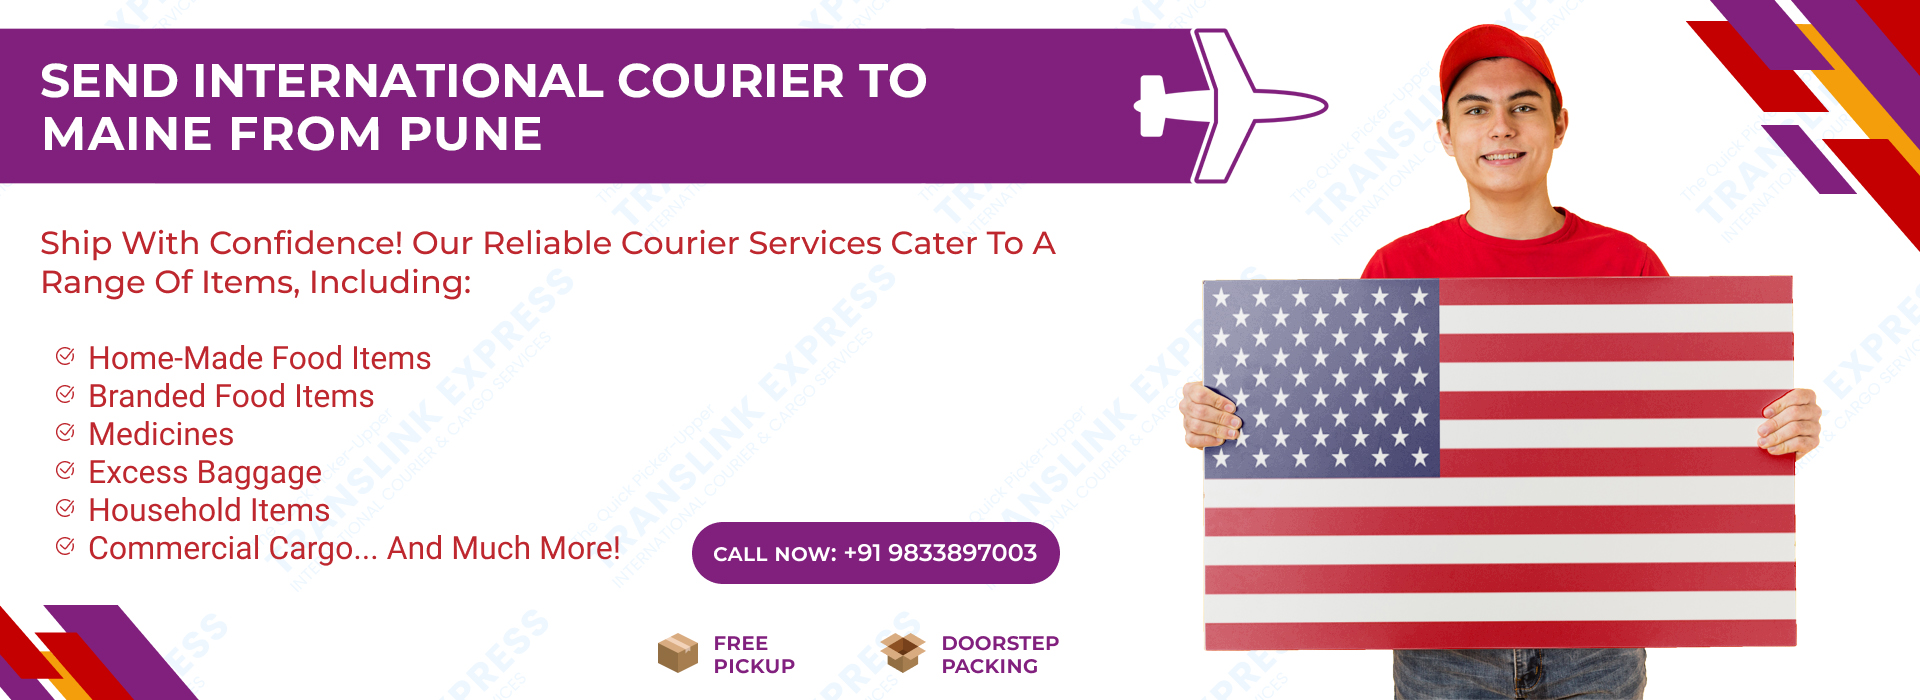 Courier to Maine From Pune